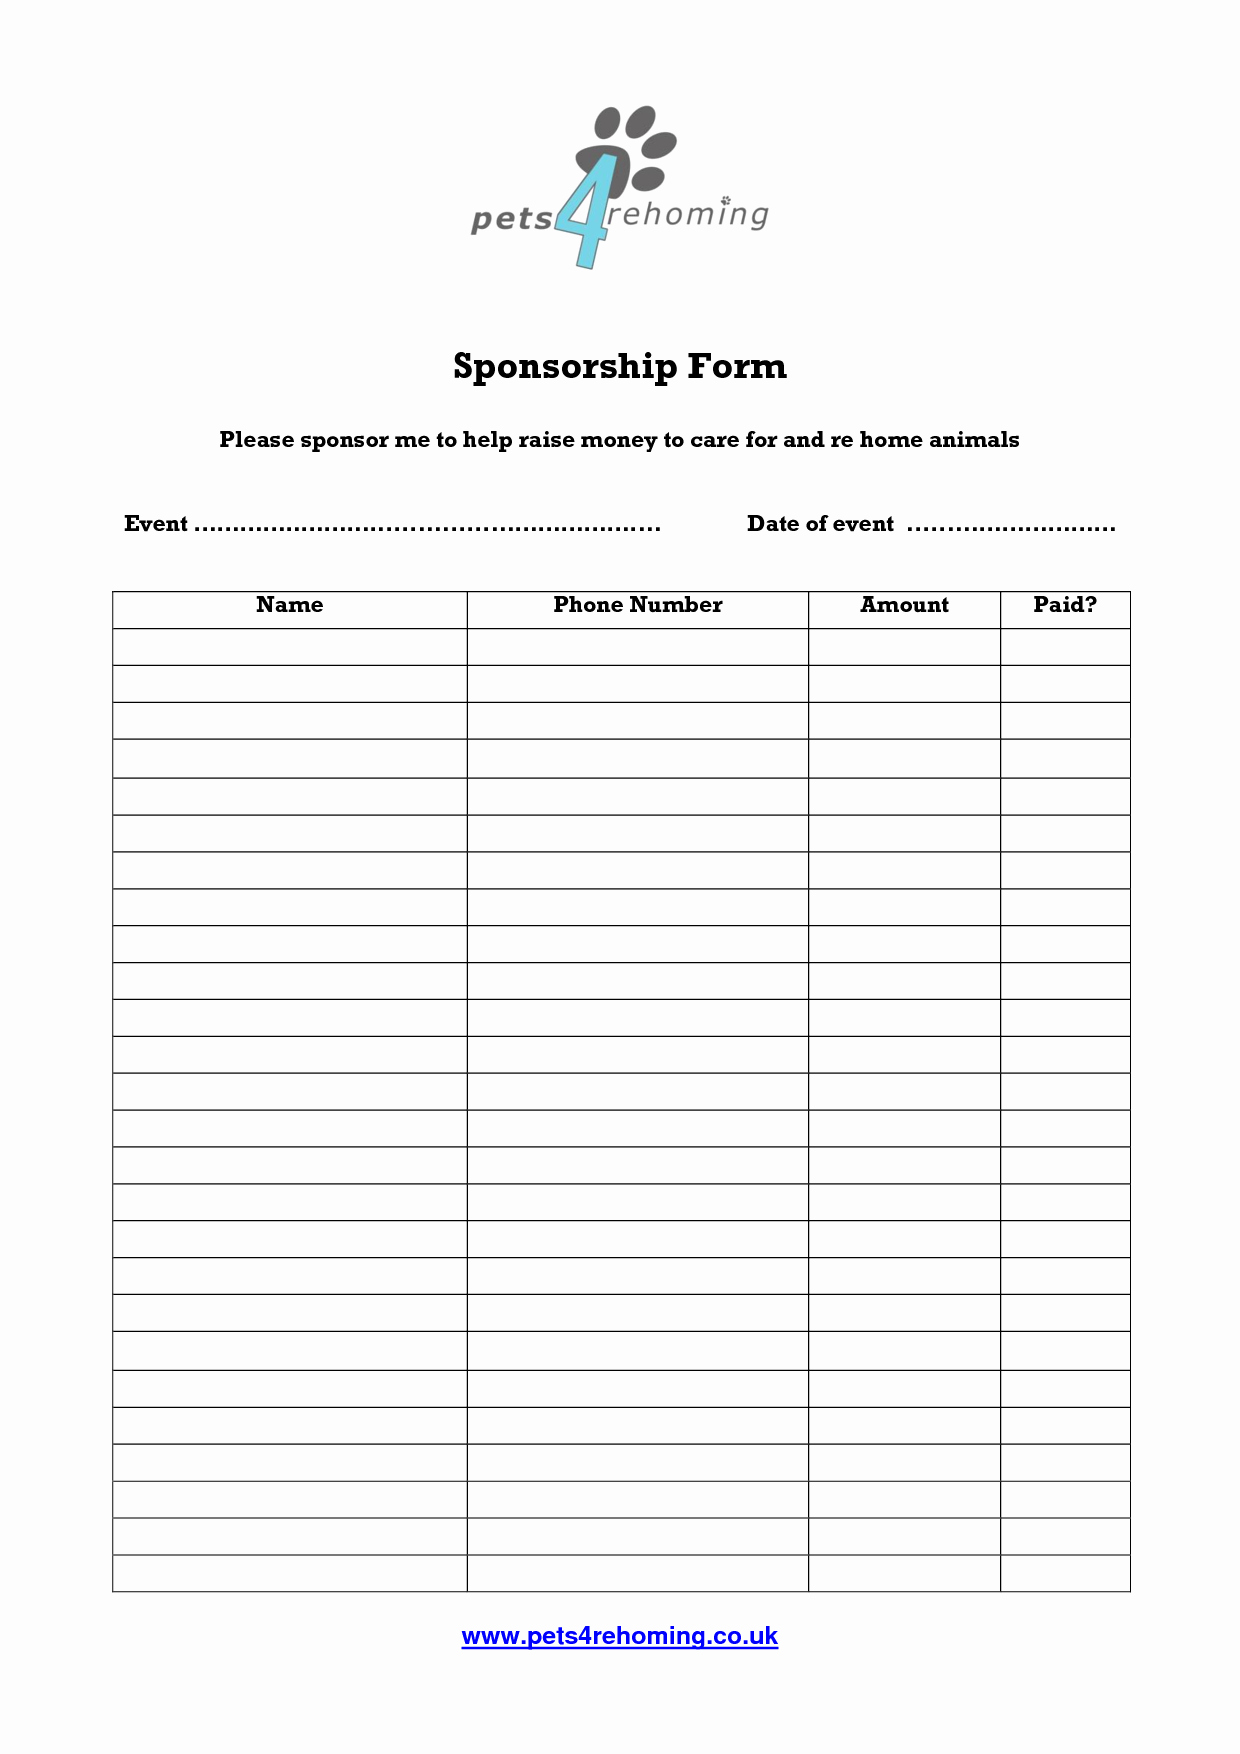 Pre order form Template Free Best Of Free Sponsorship form Template Oloschurchtp